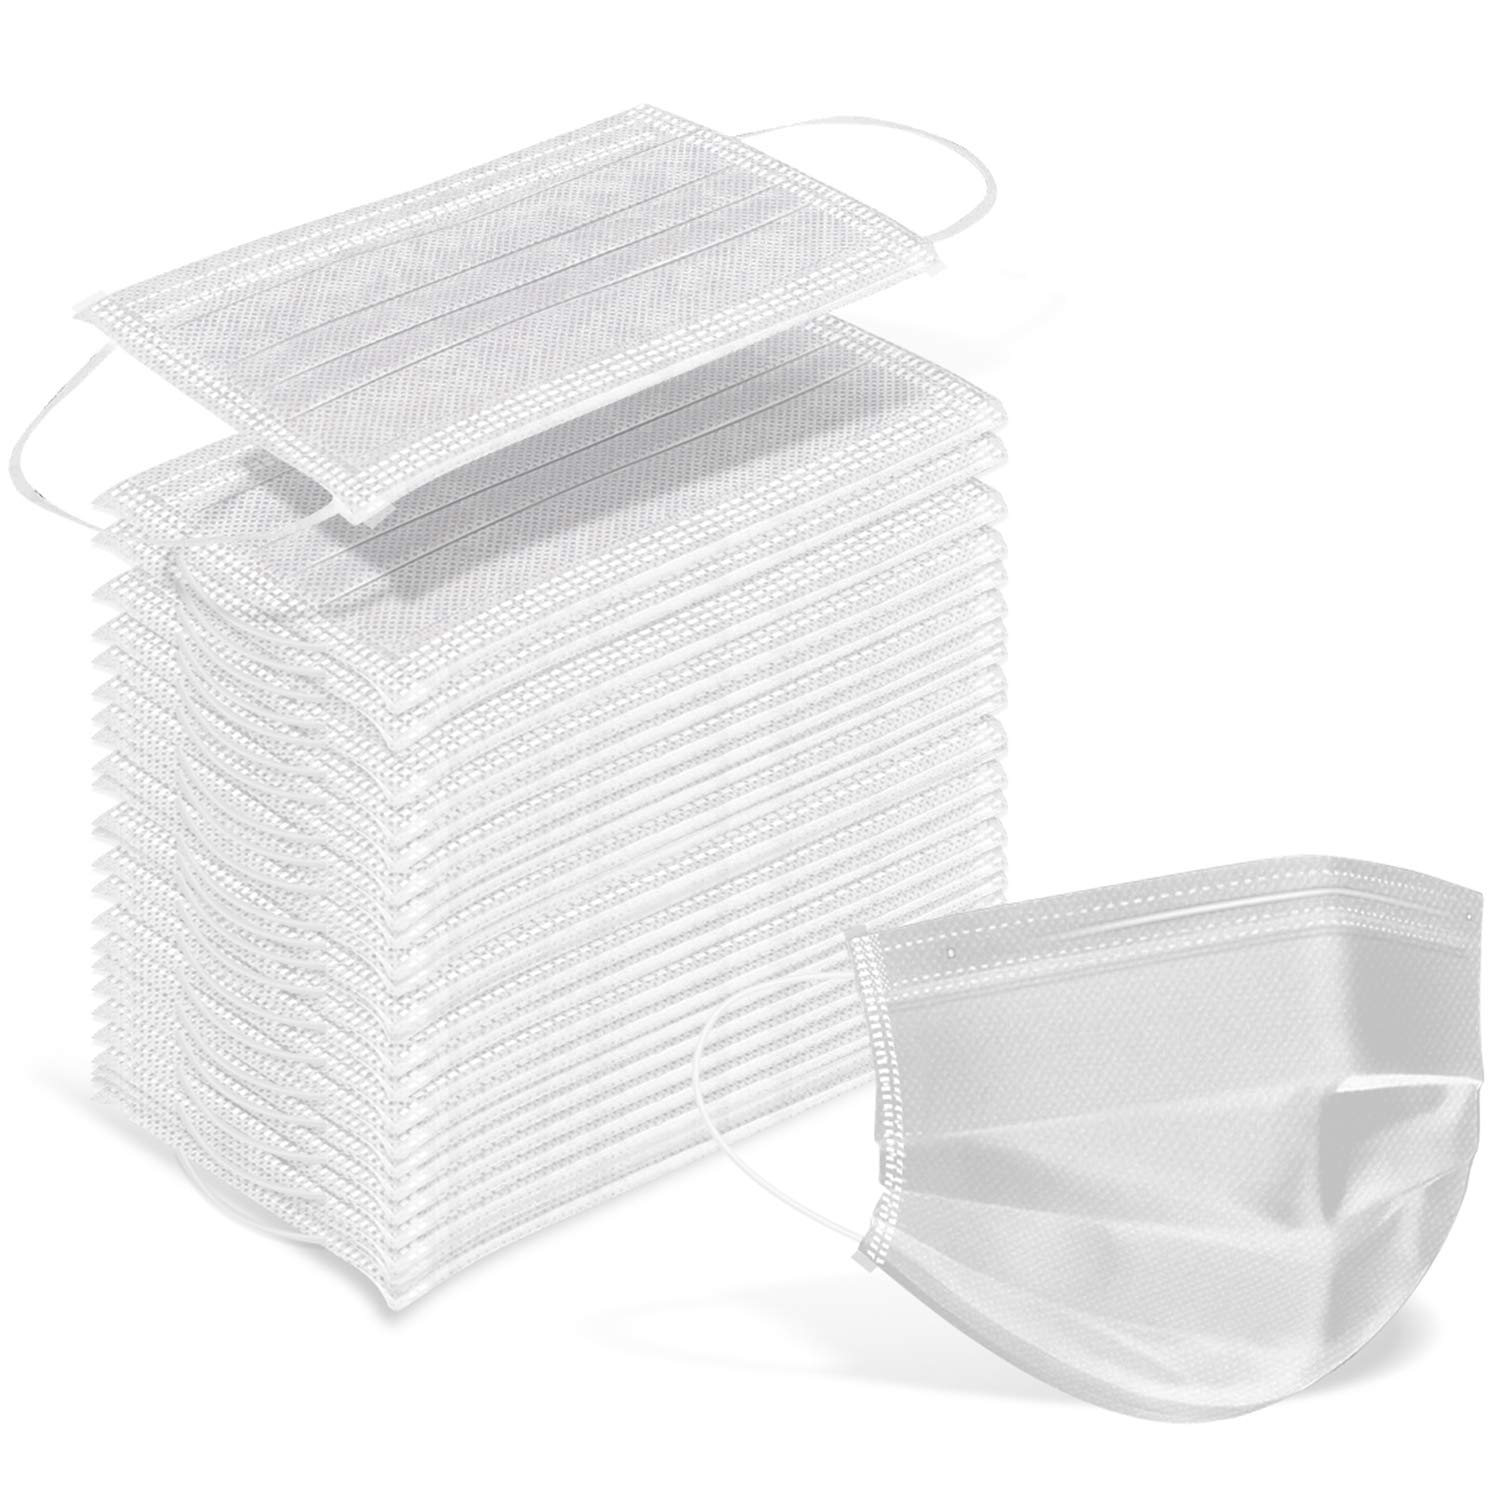 Wecolor 100 Pcs Disposable 3 Ply Earloop Face Masks, Suitable for Home, School, Office and Outdoors (White)